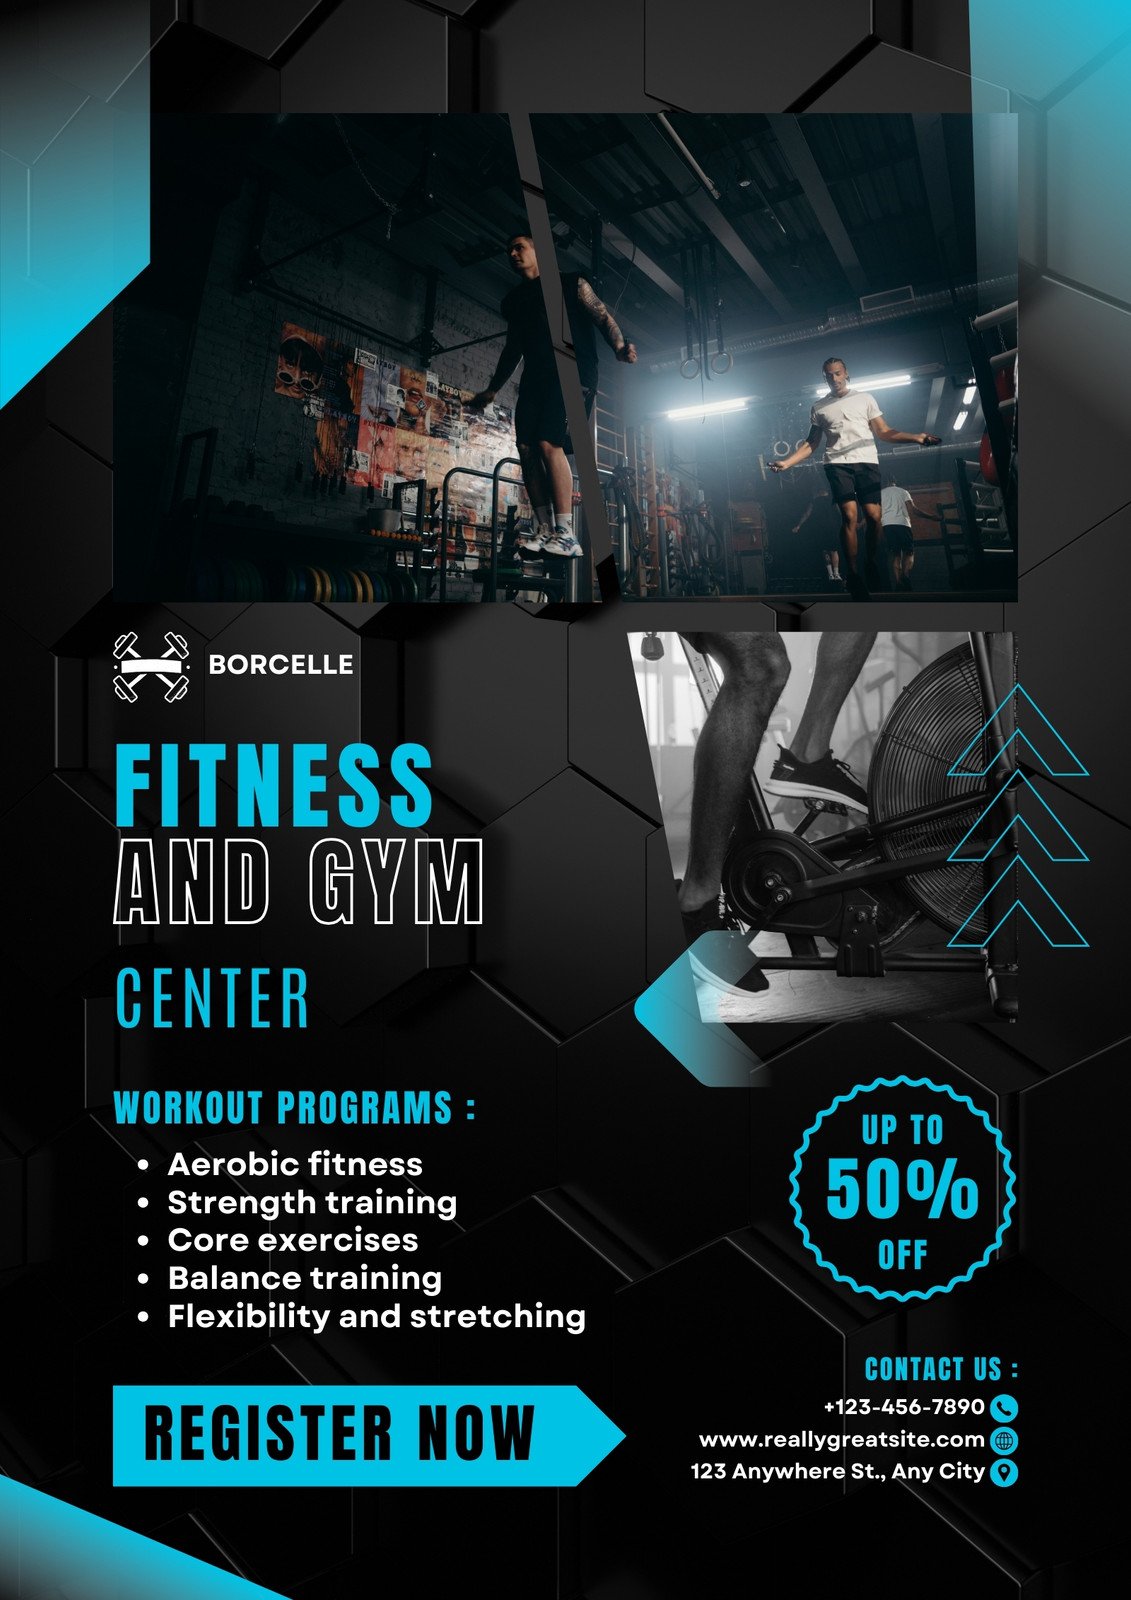 Personal Training Flyer Template in Word, Publisher, Google Docs, PSD,  Pages - Download